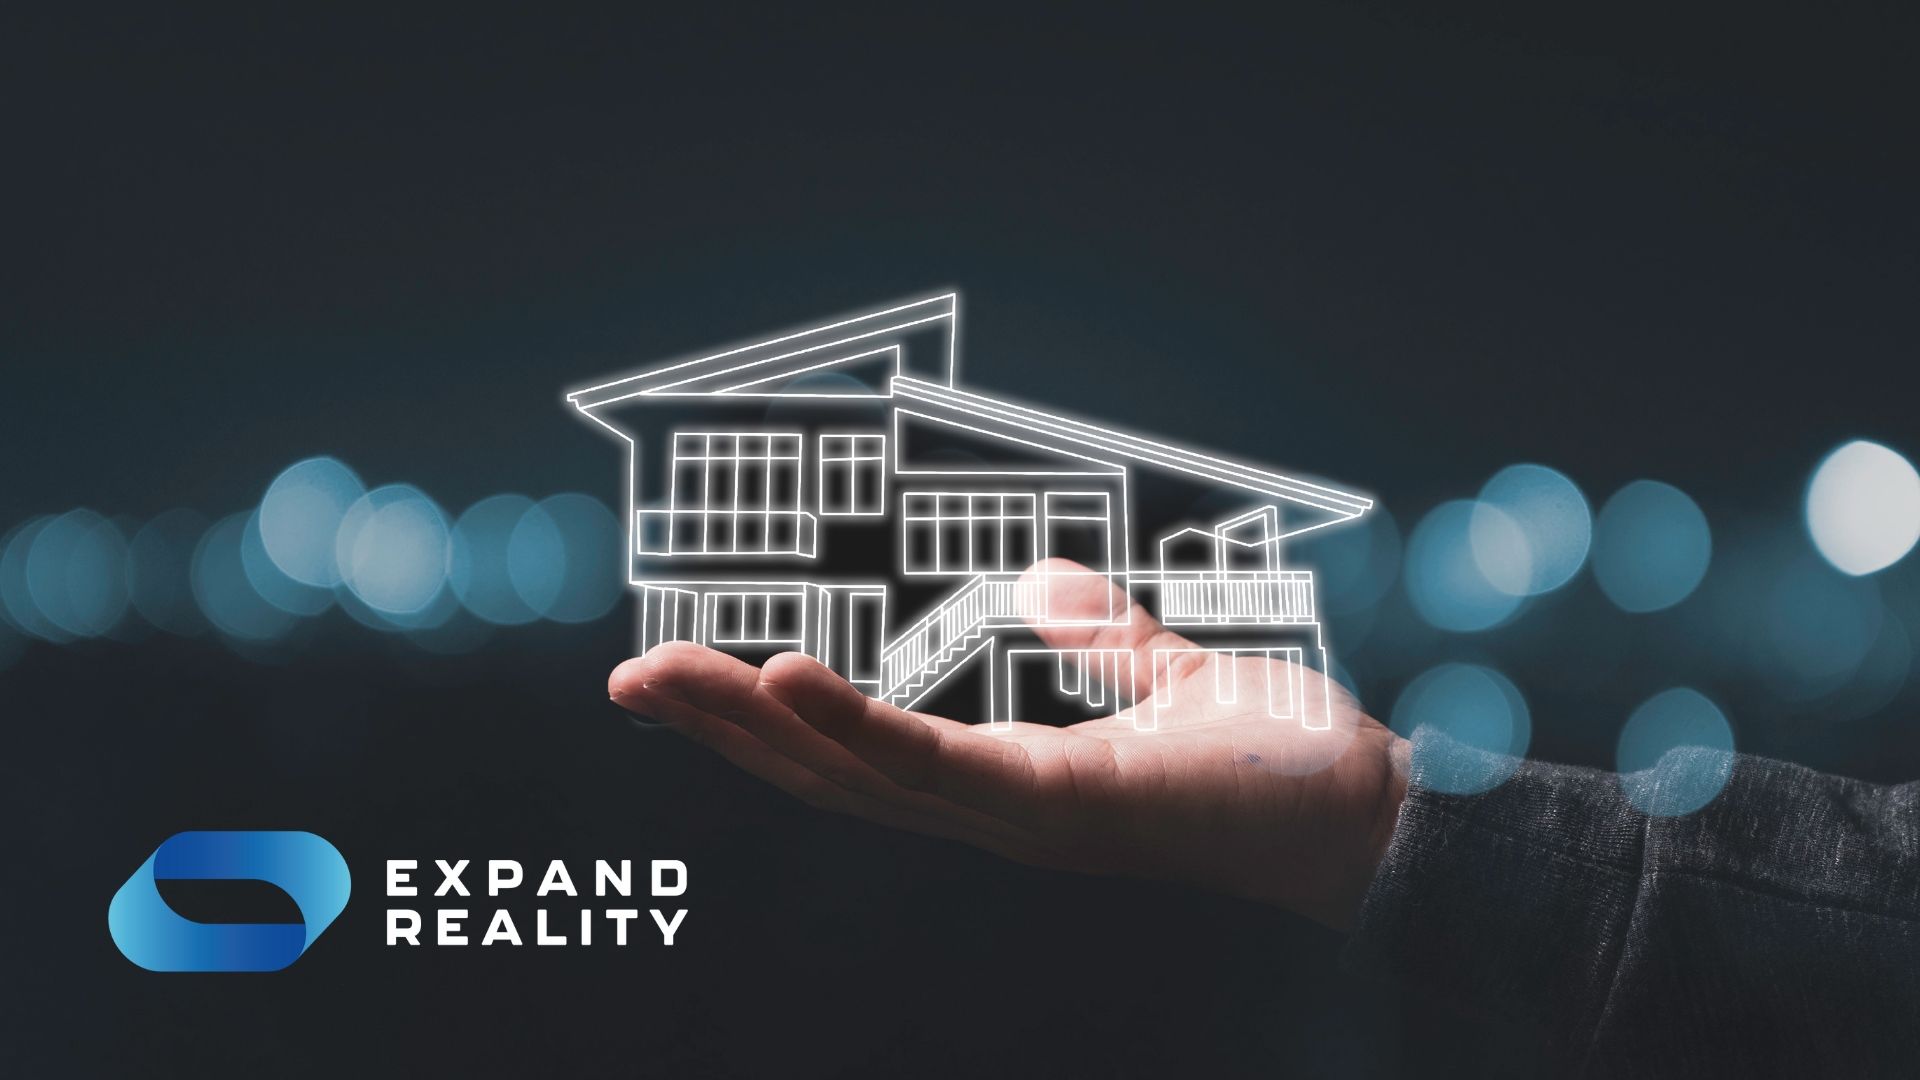 Could virtual real estate be the future of property ownership? Find out about this new and exciting area of investment in our 5-minute read.